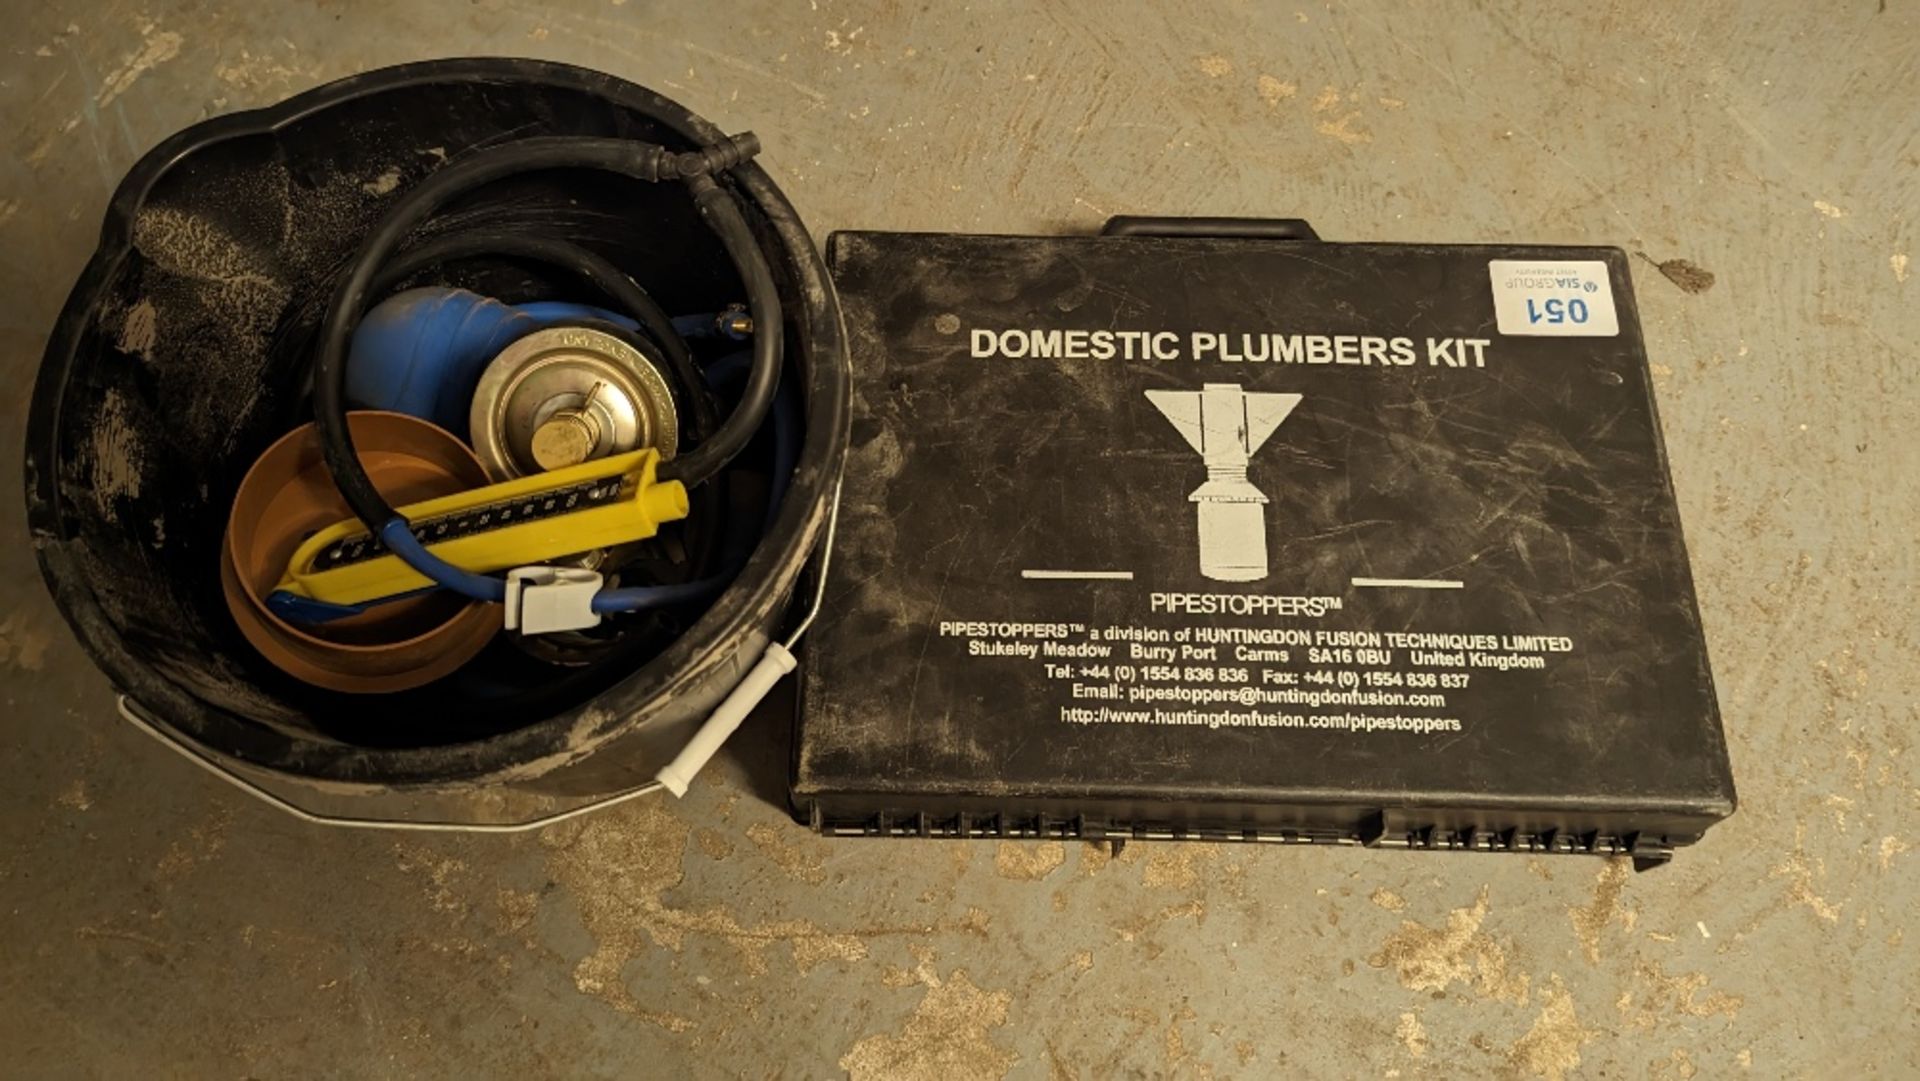 Pipestoppers domestic plumbers kit - Image 4 of 4